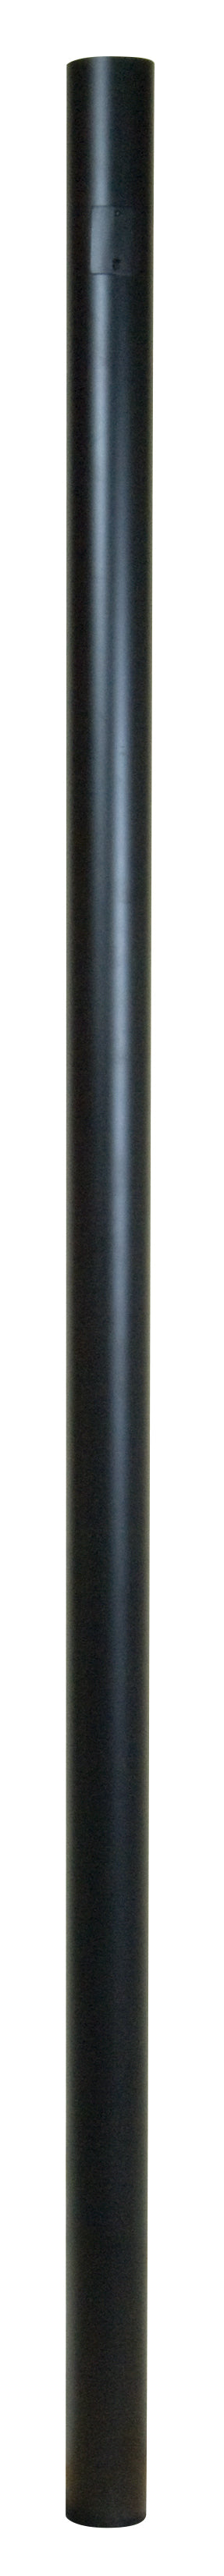 Craftmade 84" Smooth Direct Burial Post in Textured Black